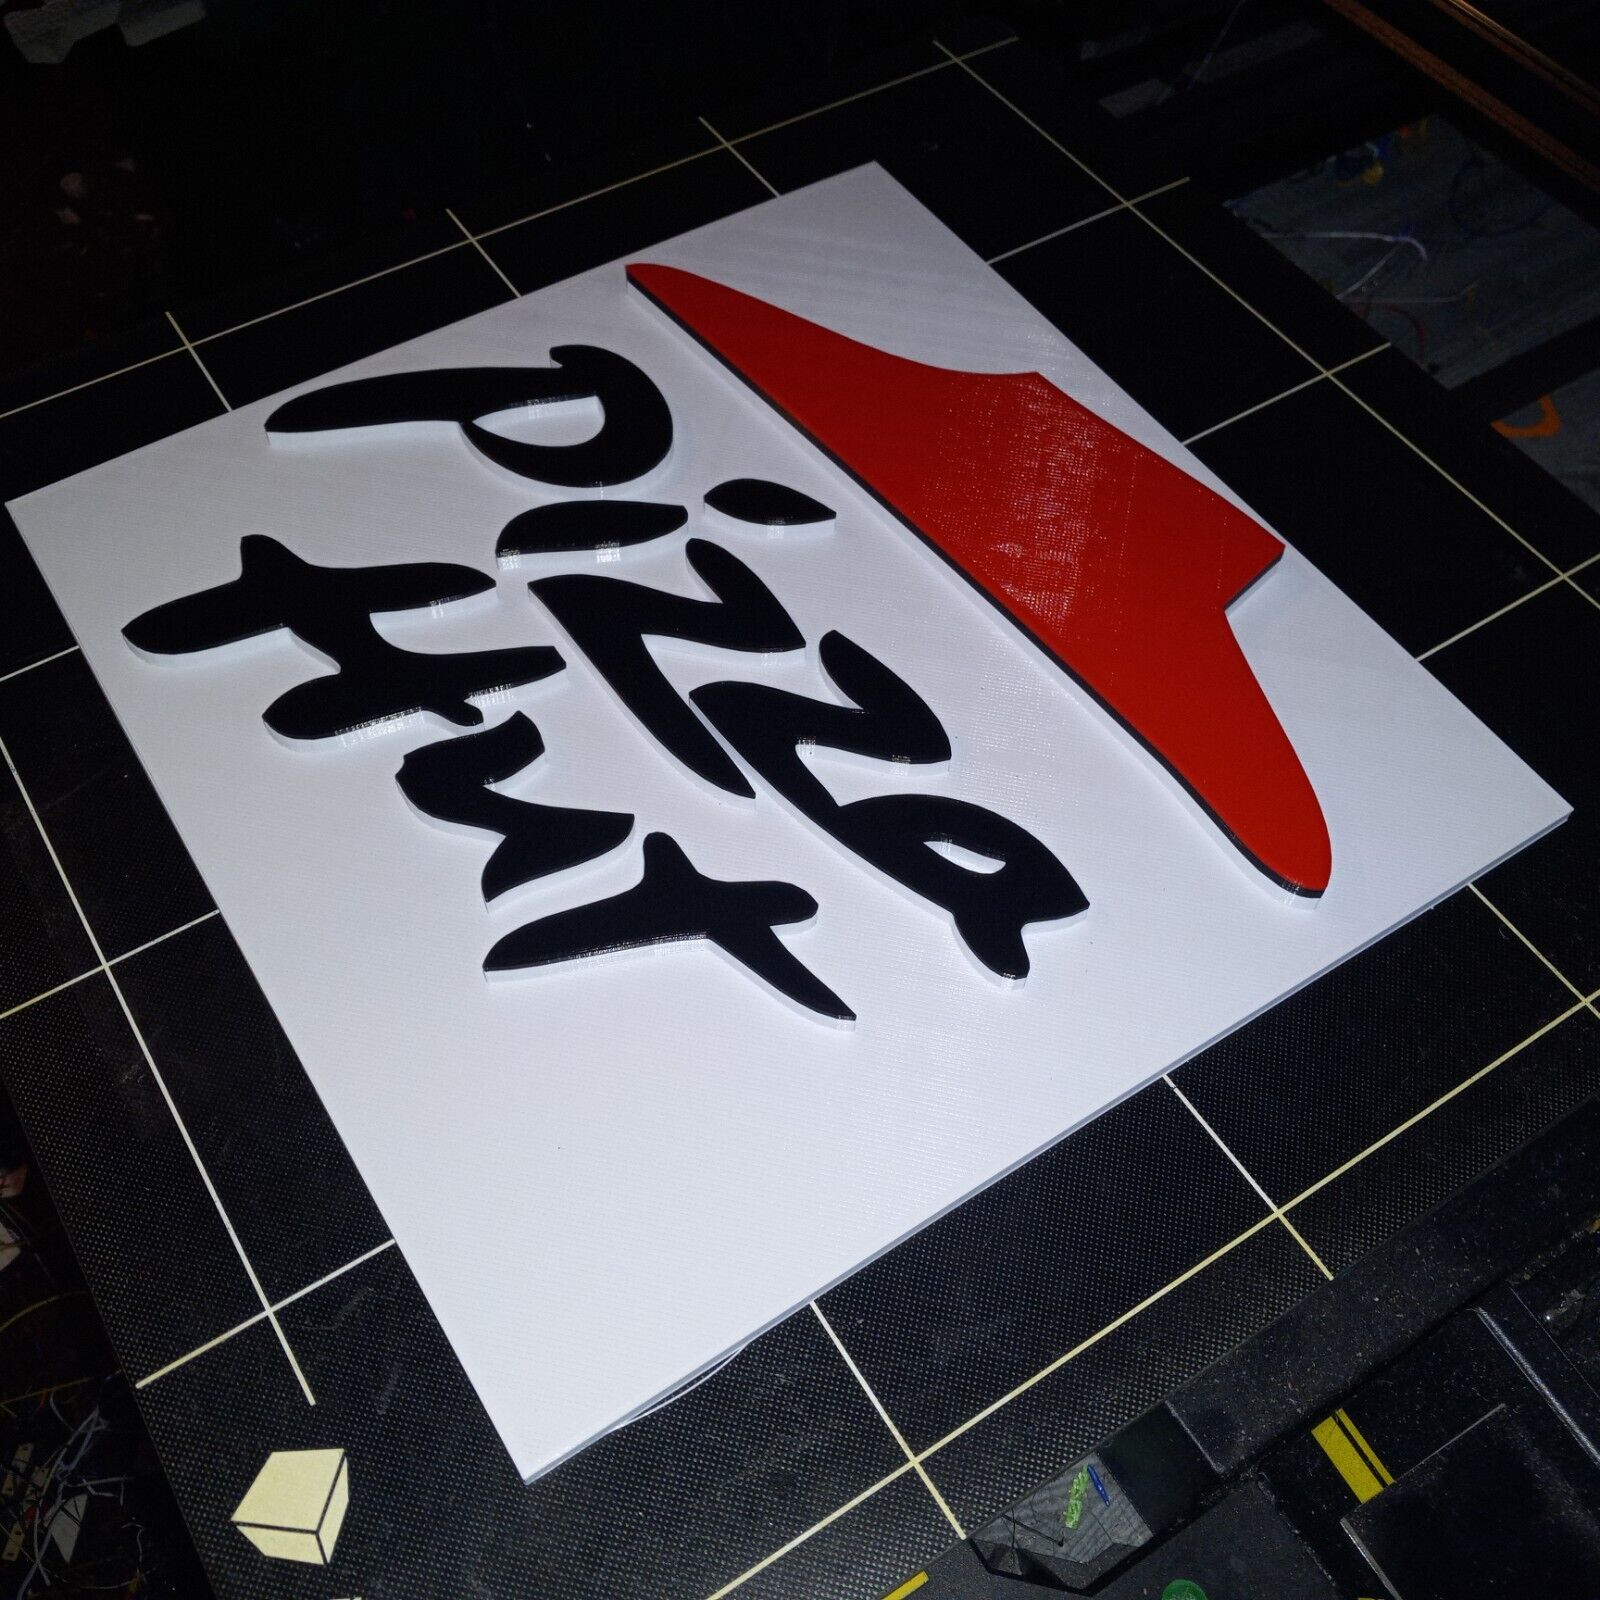 15 Inch Pizza Hut 3D Logo Sign, 3D Printed Reproduction wall sign Collection.